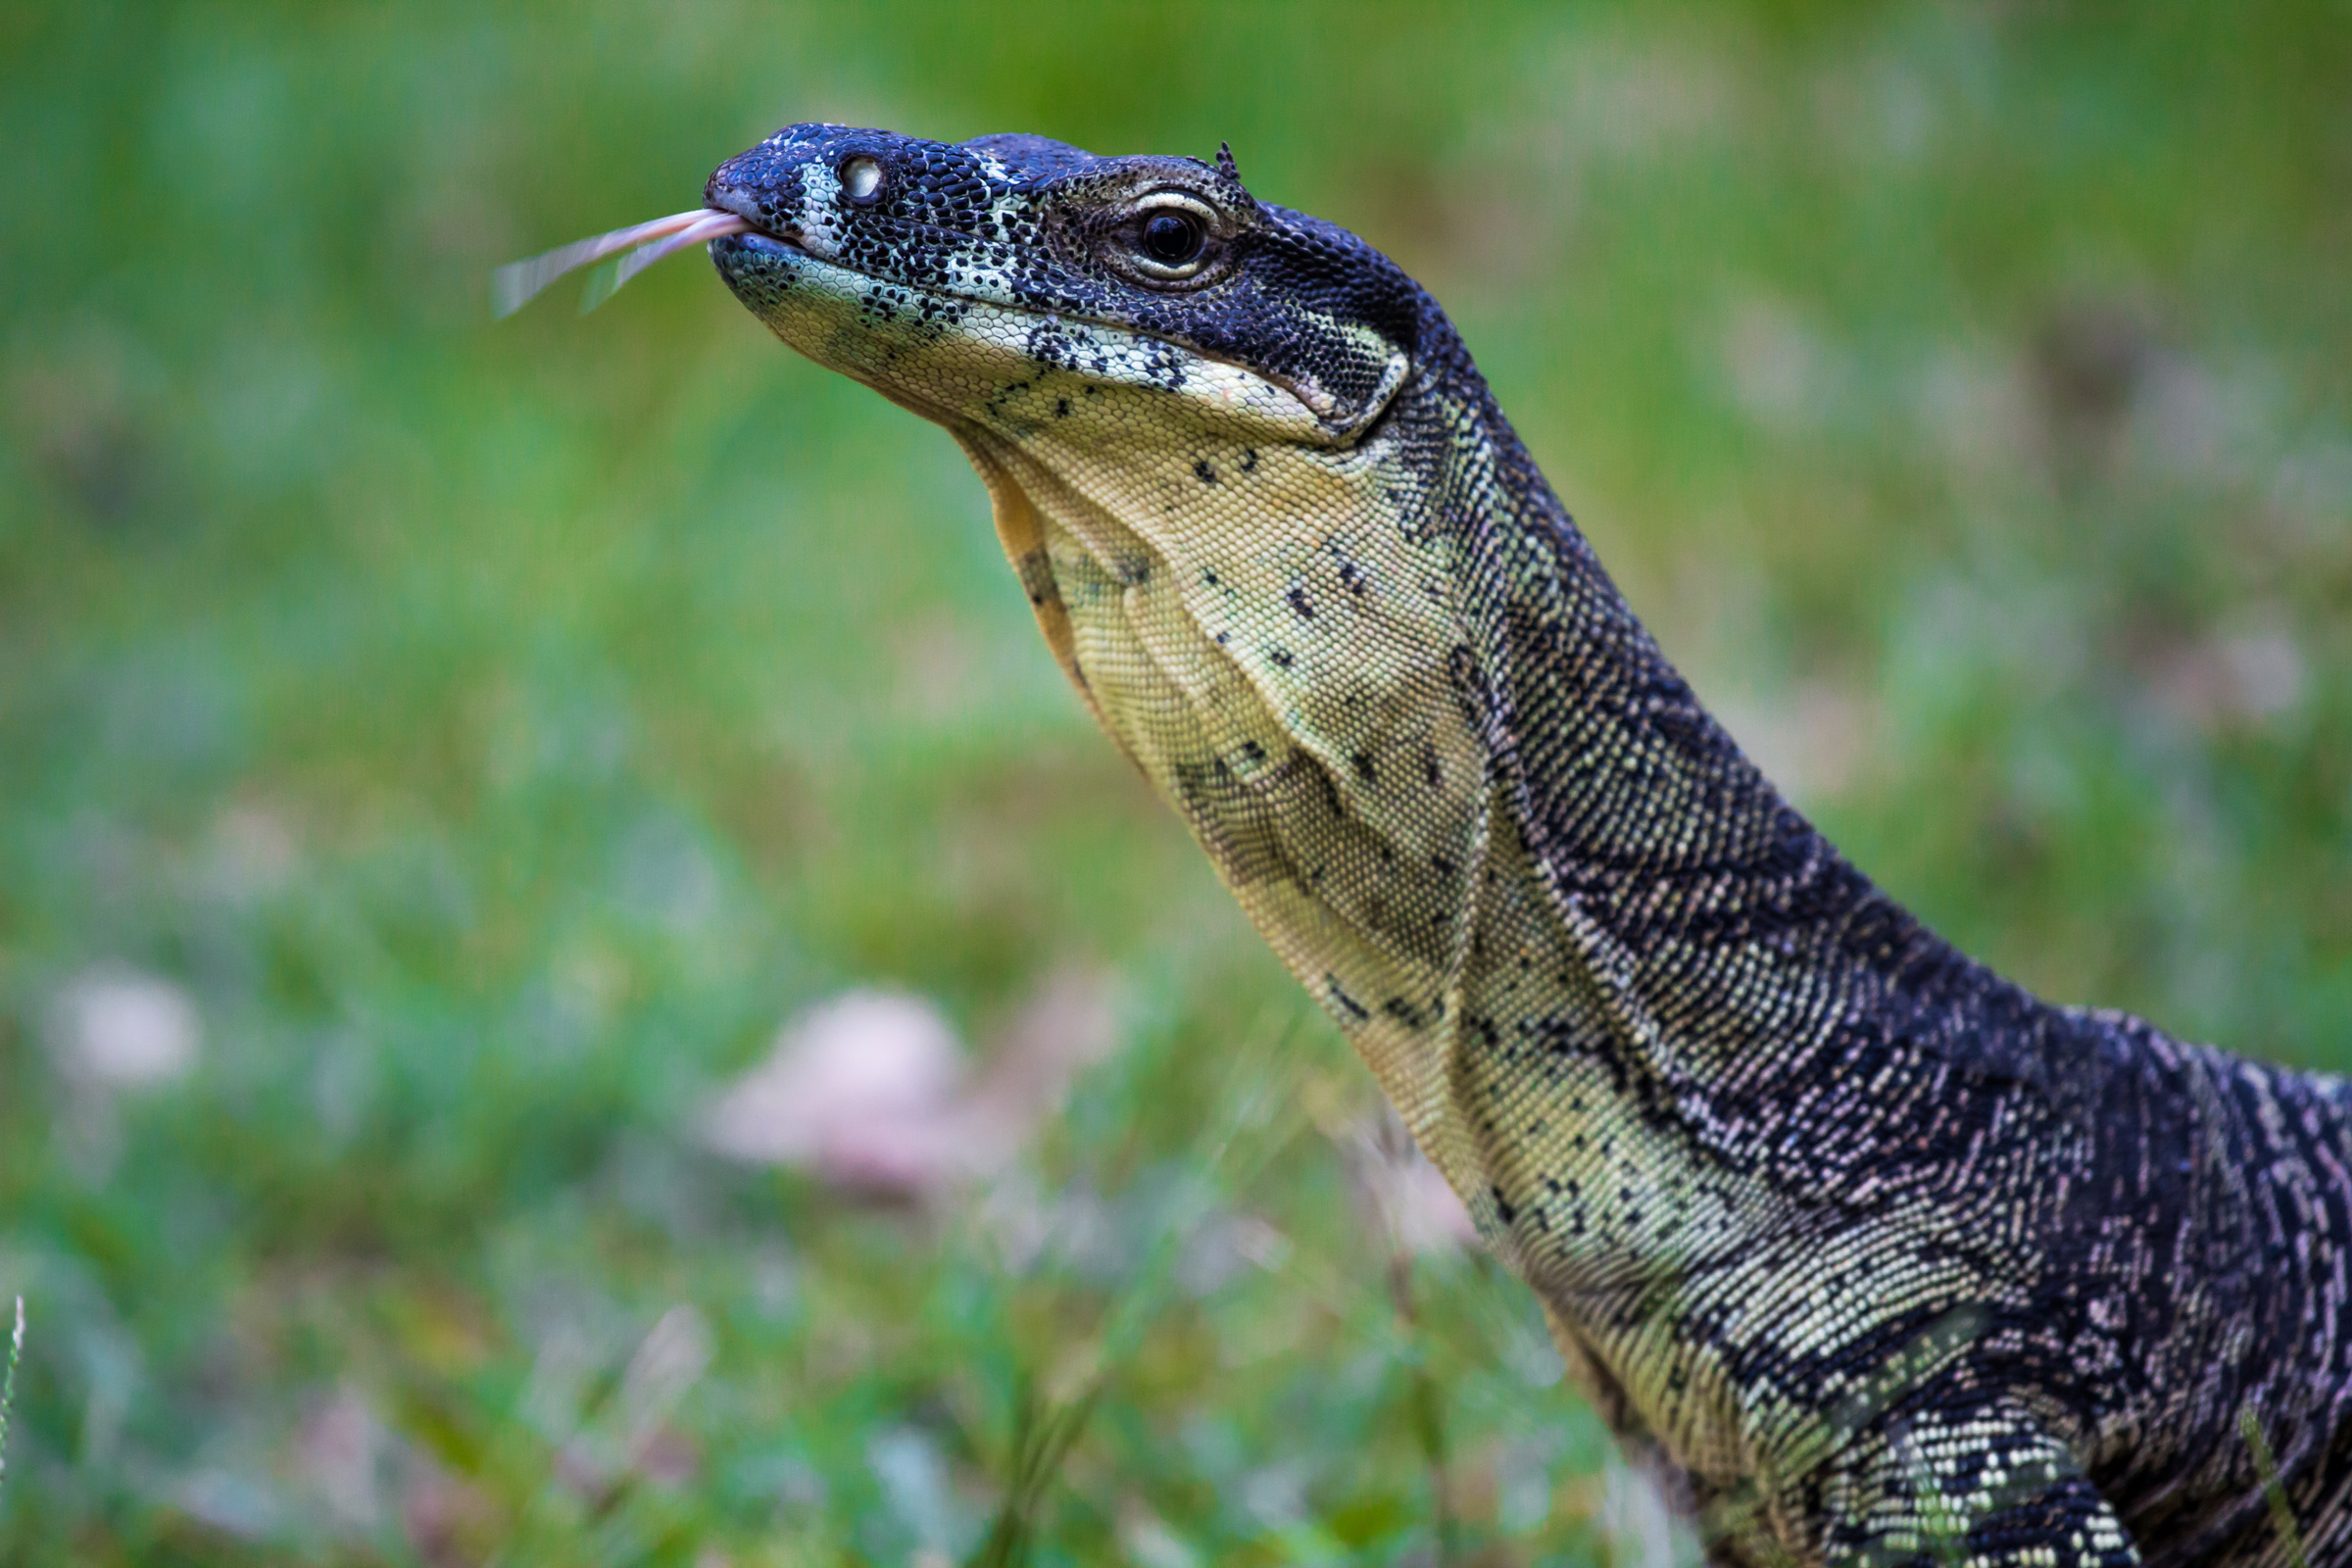 A goanna (lace monitor) in Tambourine National Park, Queensland